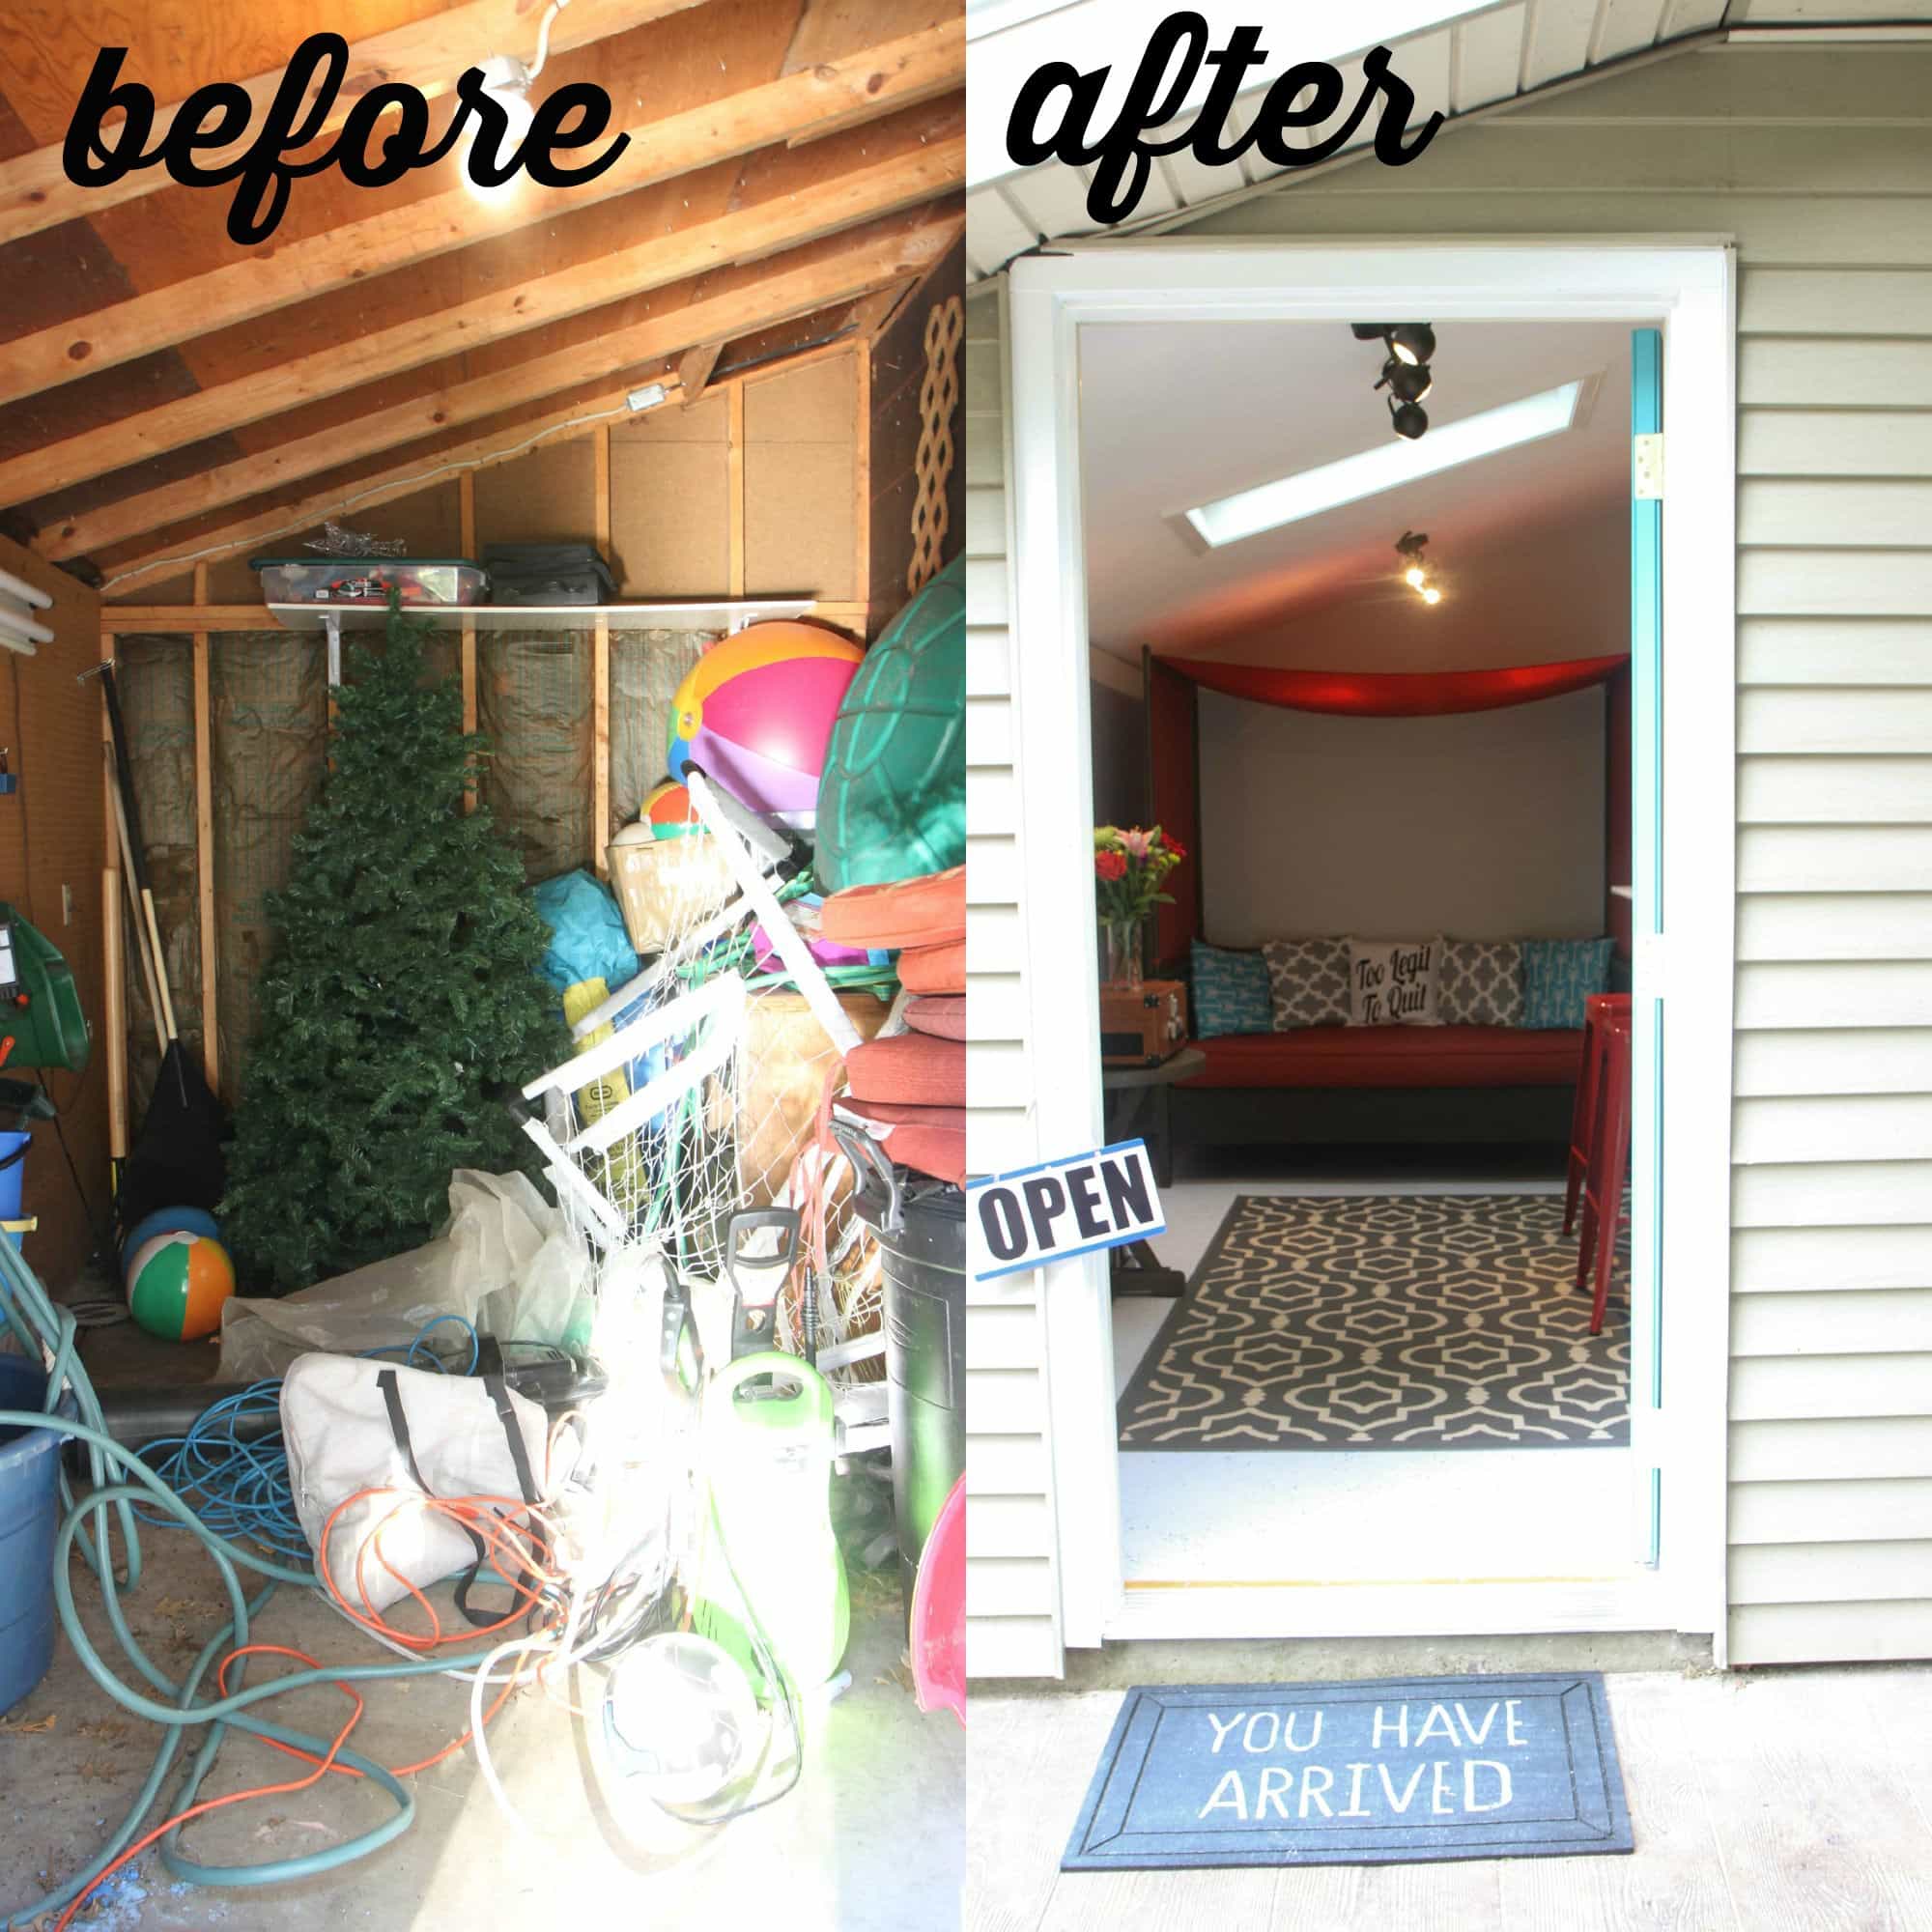 How to Makeover a Shed Into a Bonus Room (Tour Our Shed!)